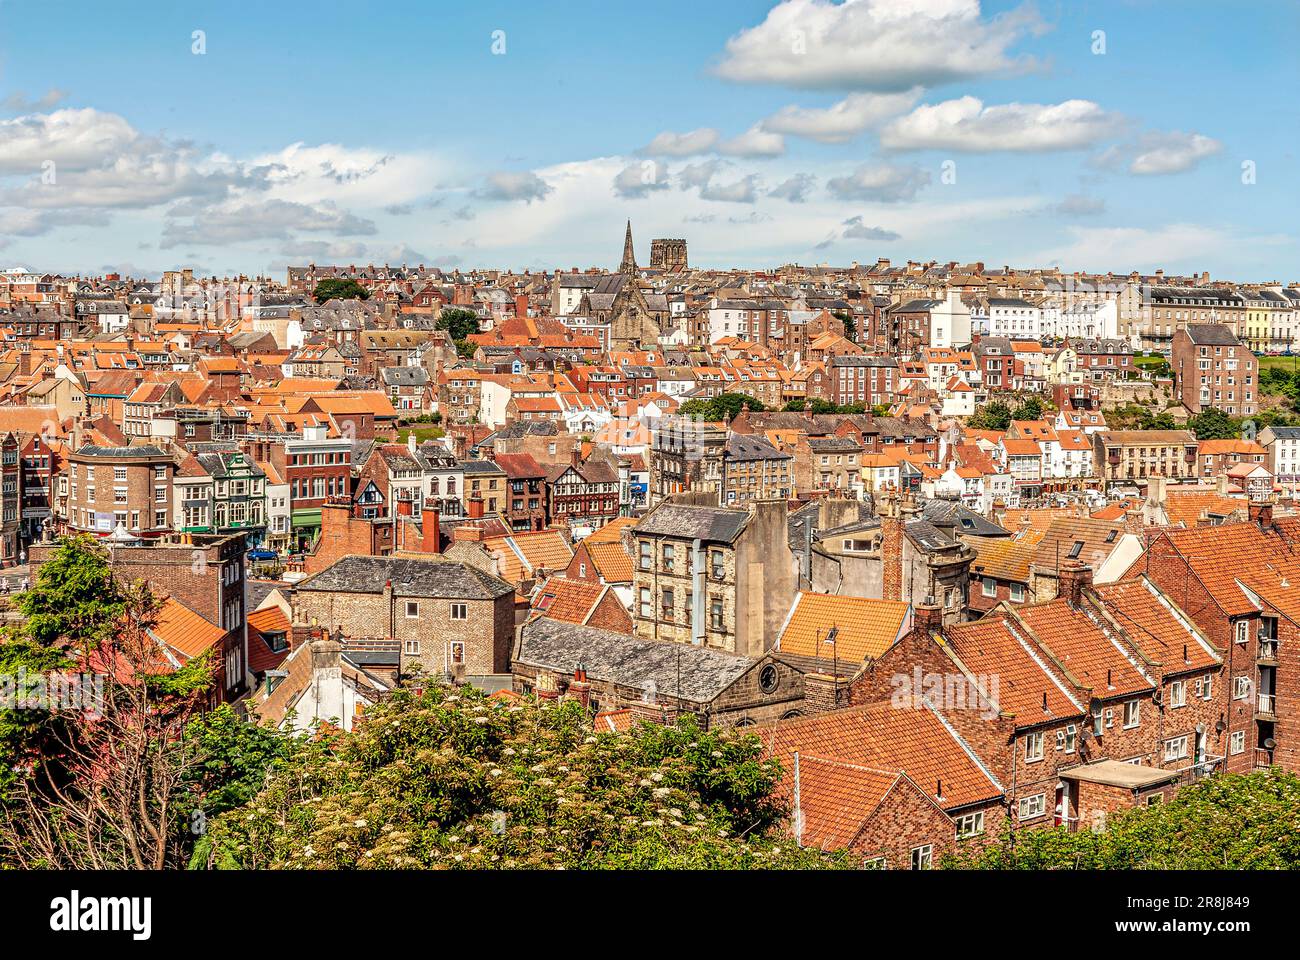 Elevated view over old town of Whitby, Yorkshire, England, UK Stock Photo